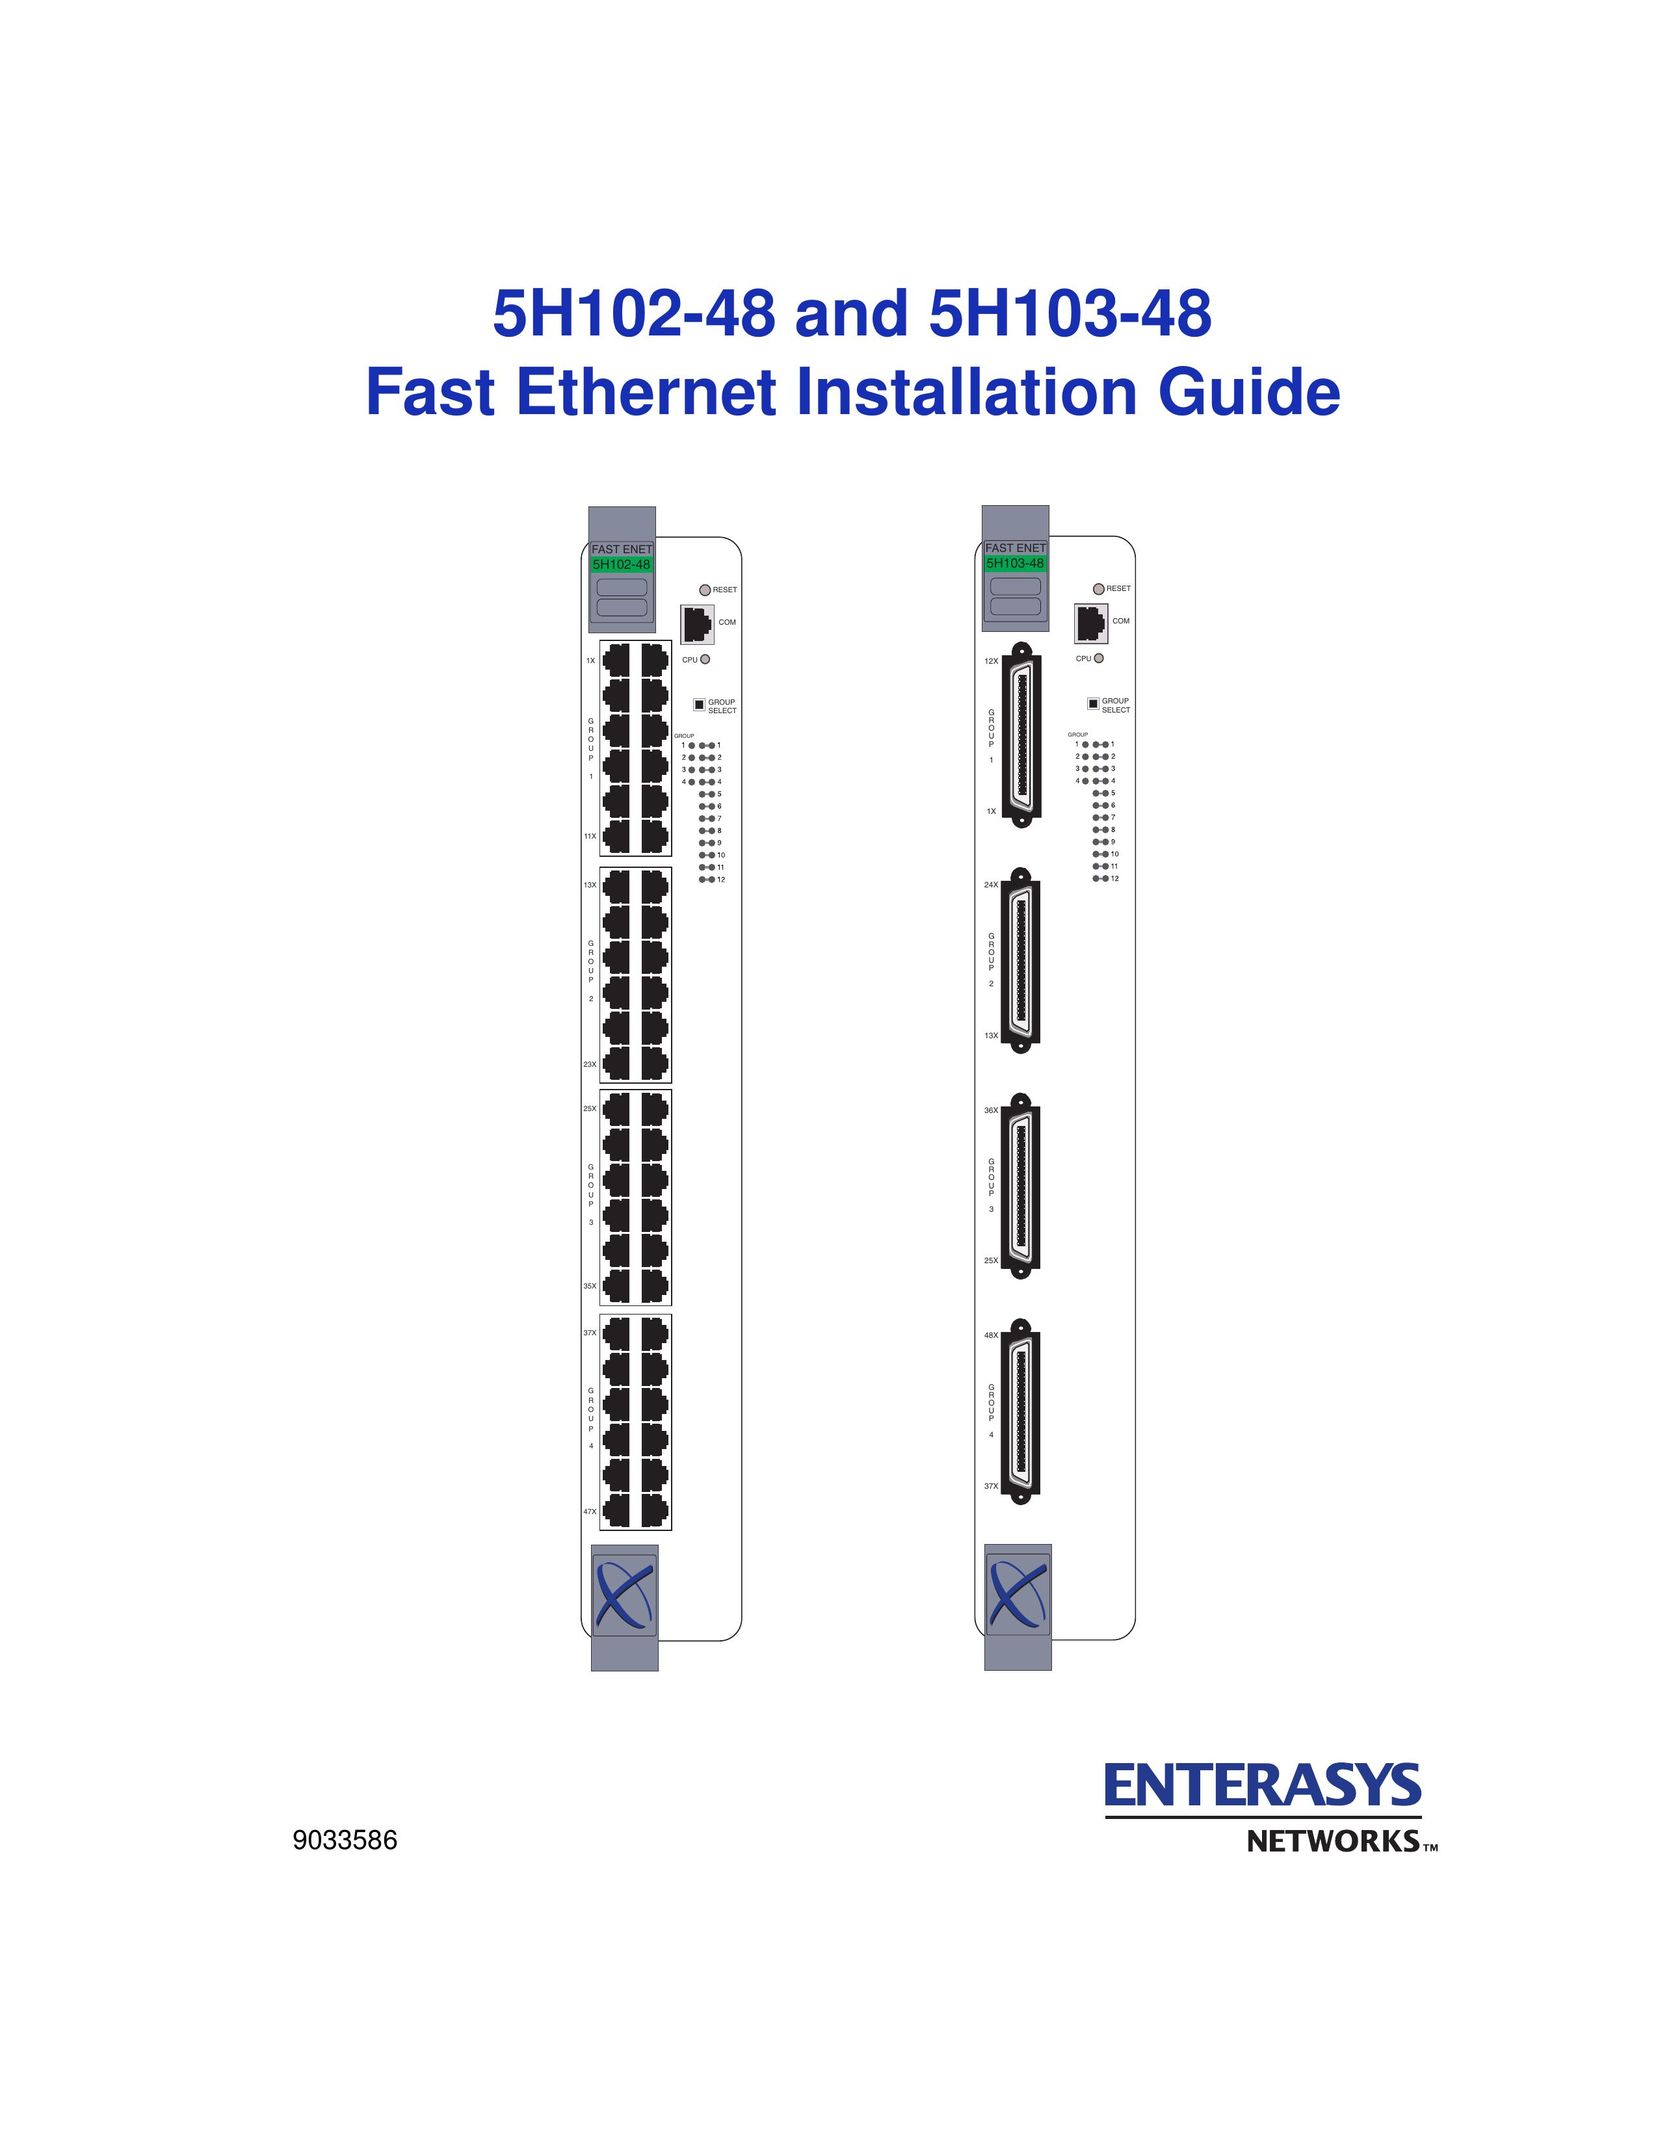 Enterasys Networks 5H103-48 Home Theater Screen User Manual